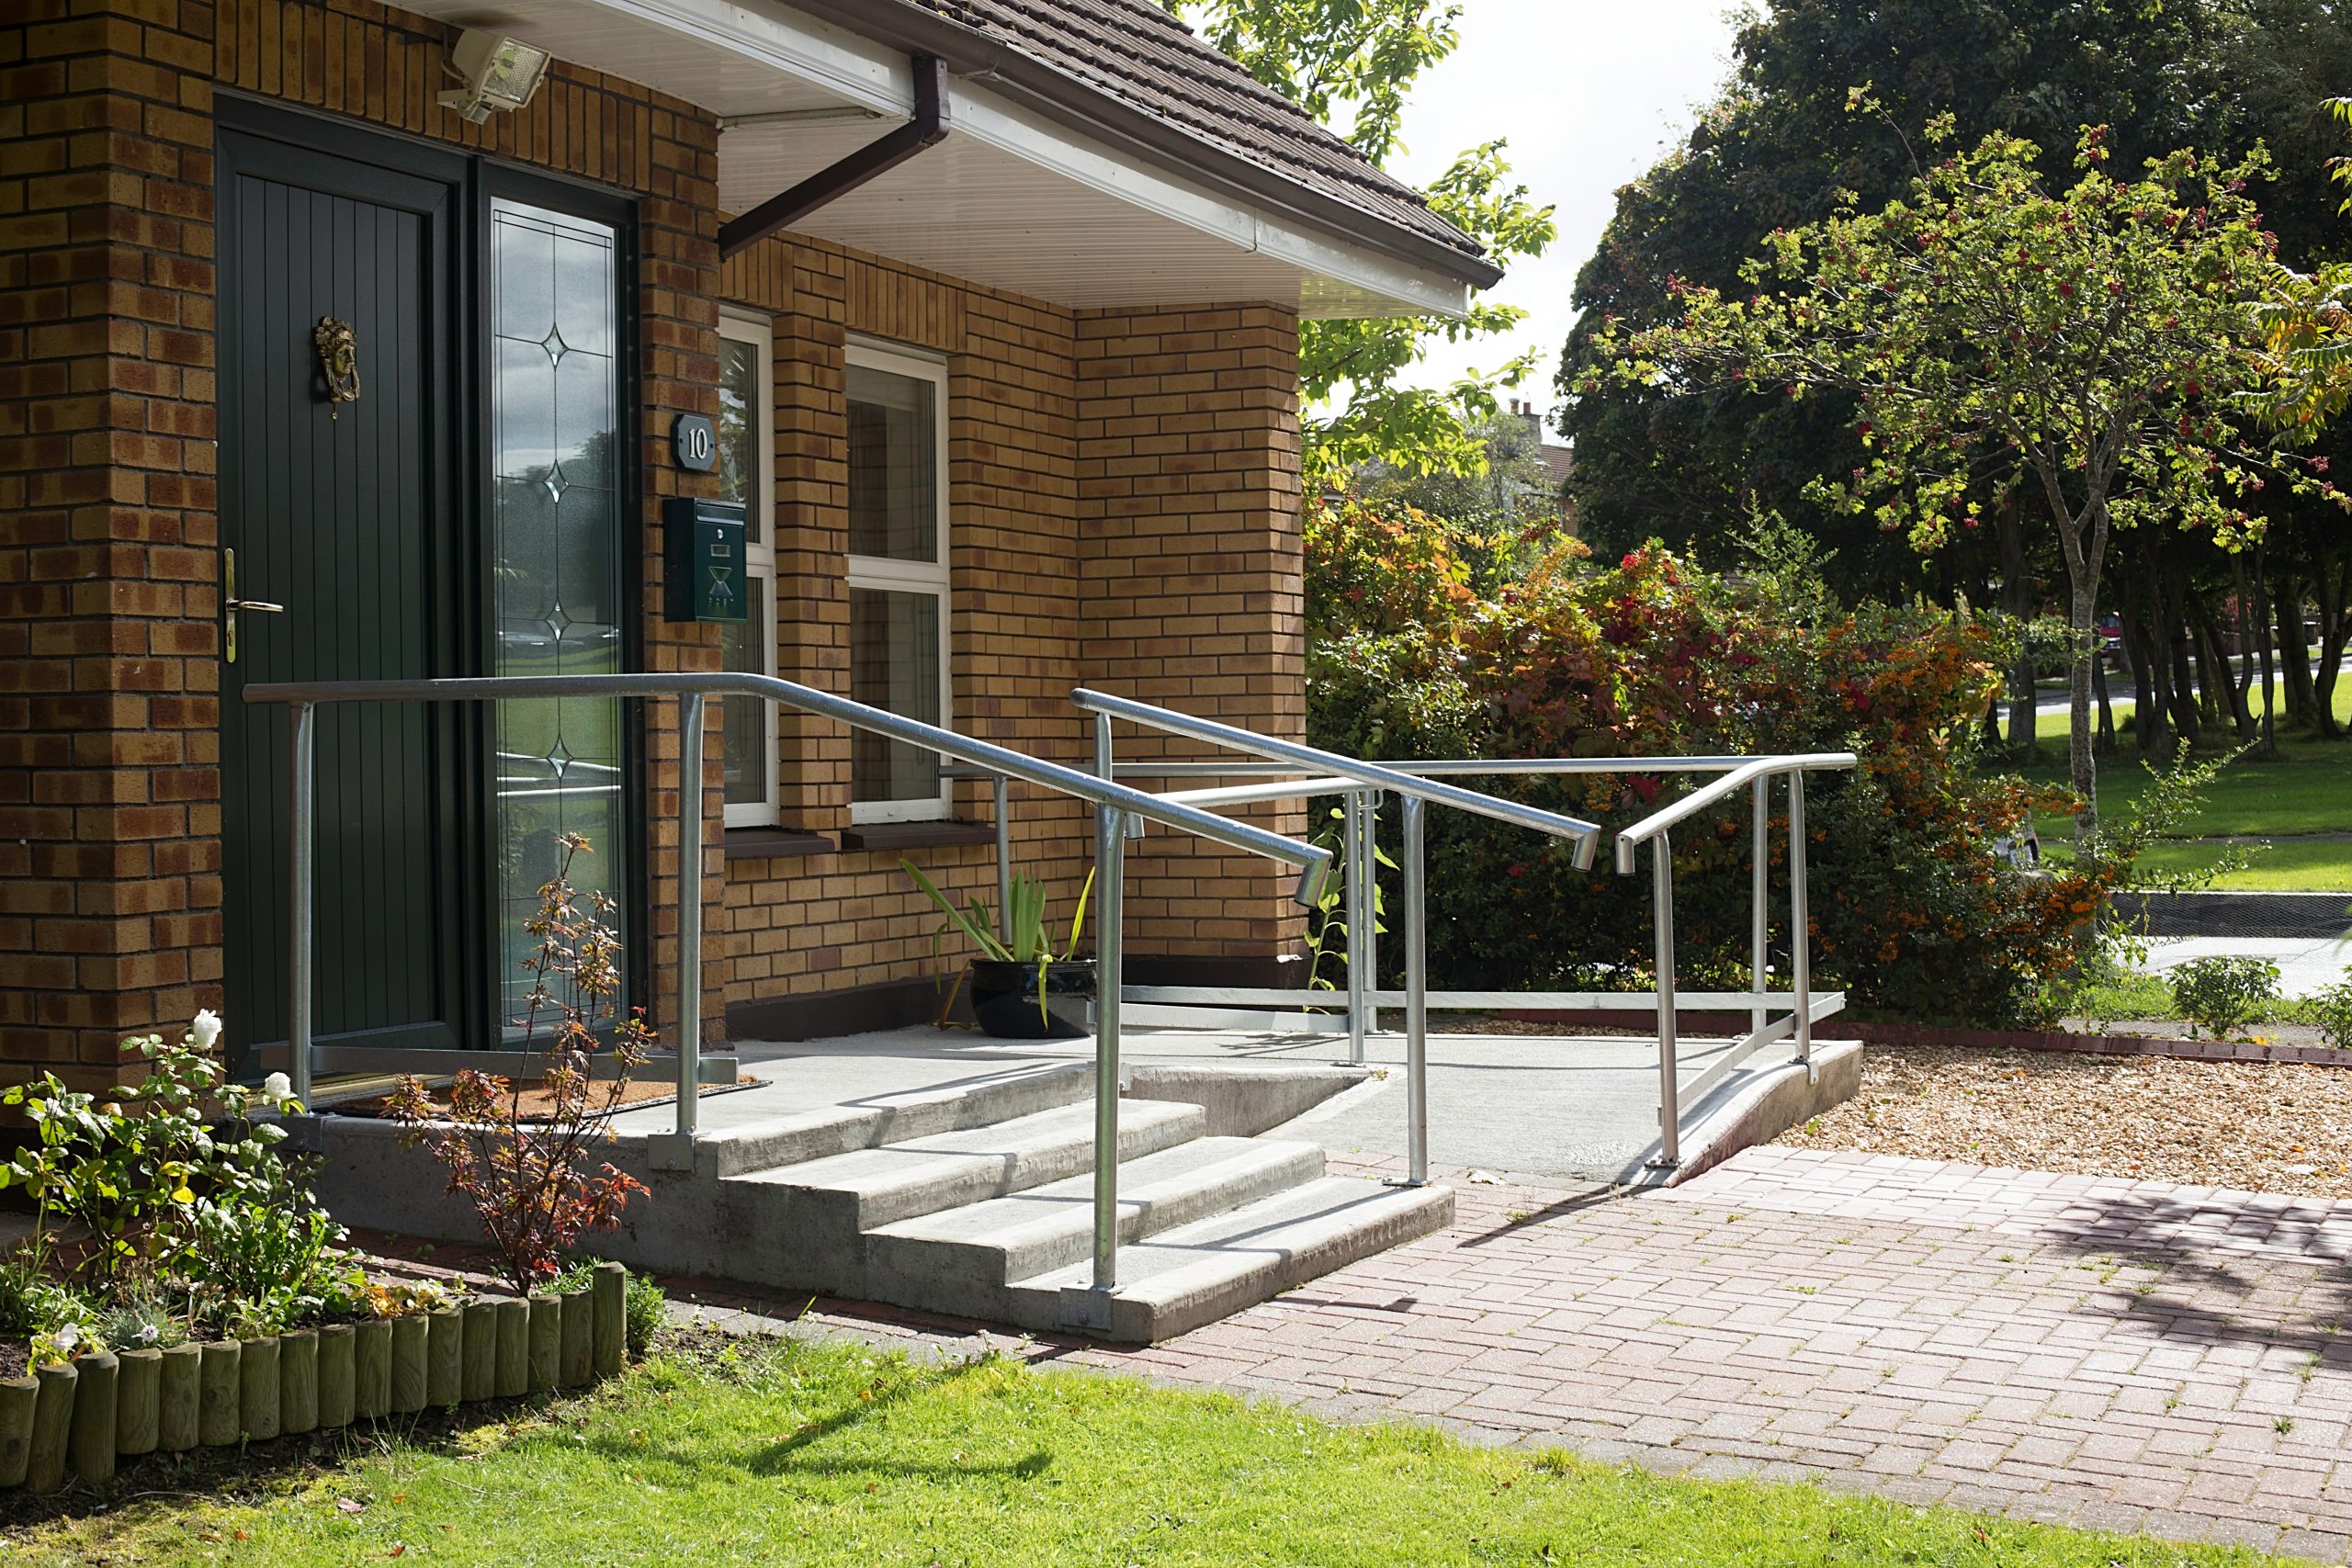 Image showing steps and a ramp to an accessible home